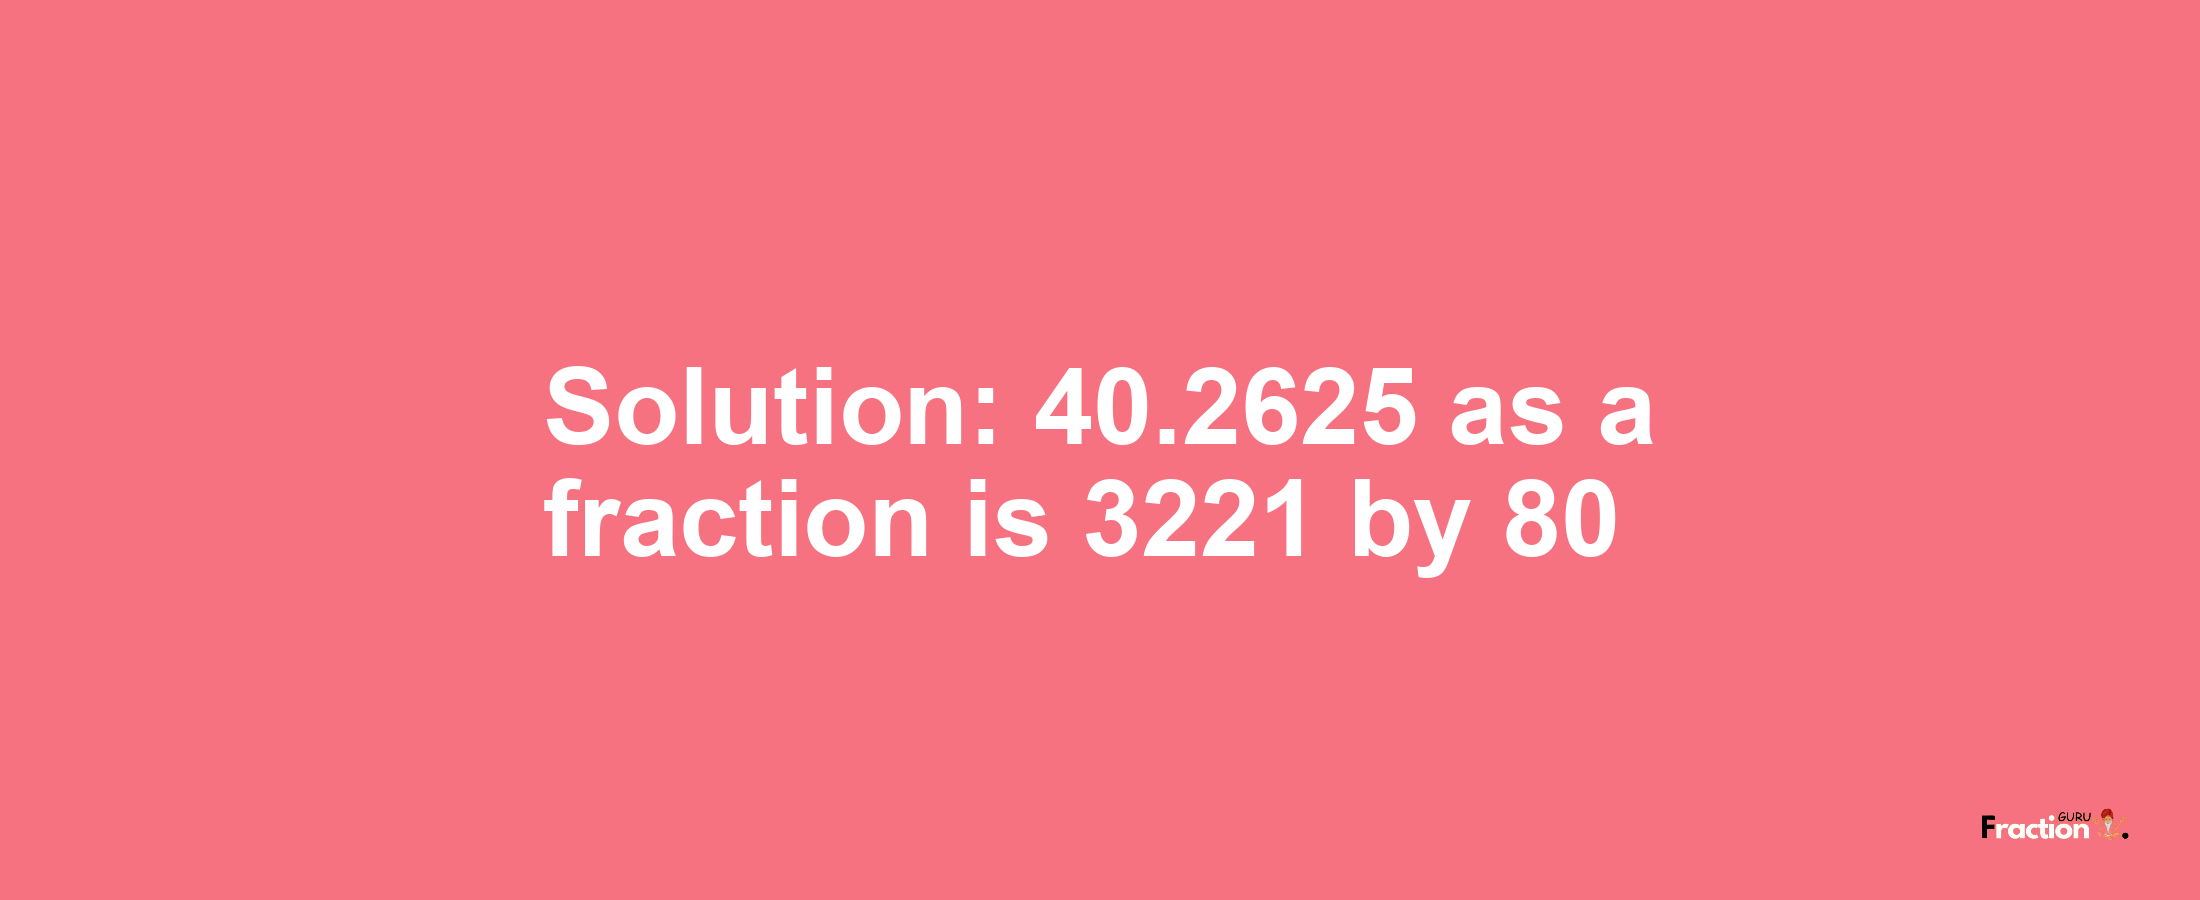 Solution:40.2625 as a fraction is 3221/80